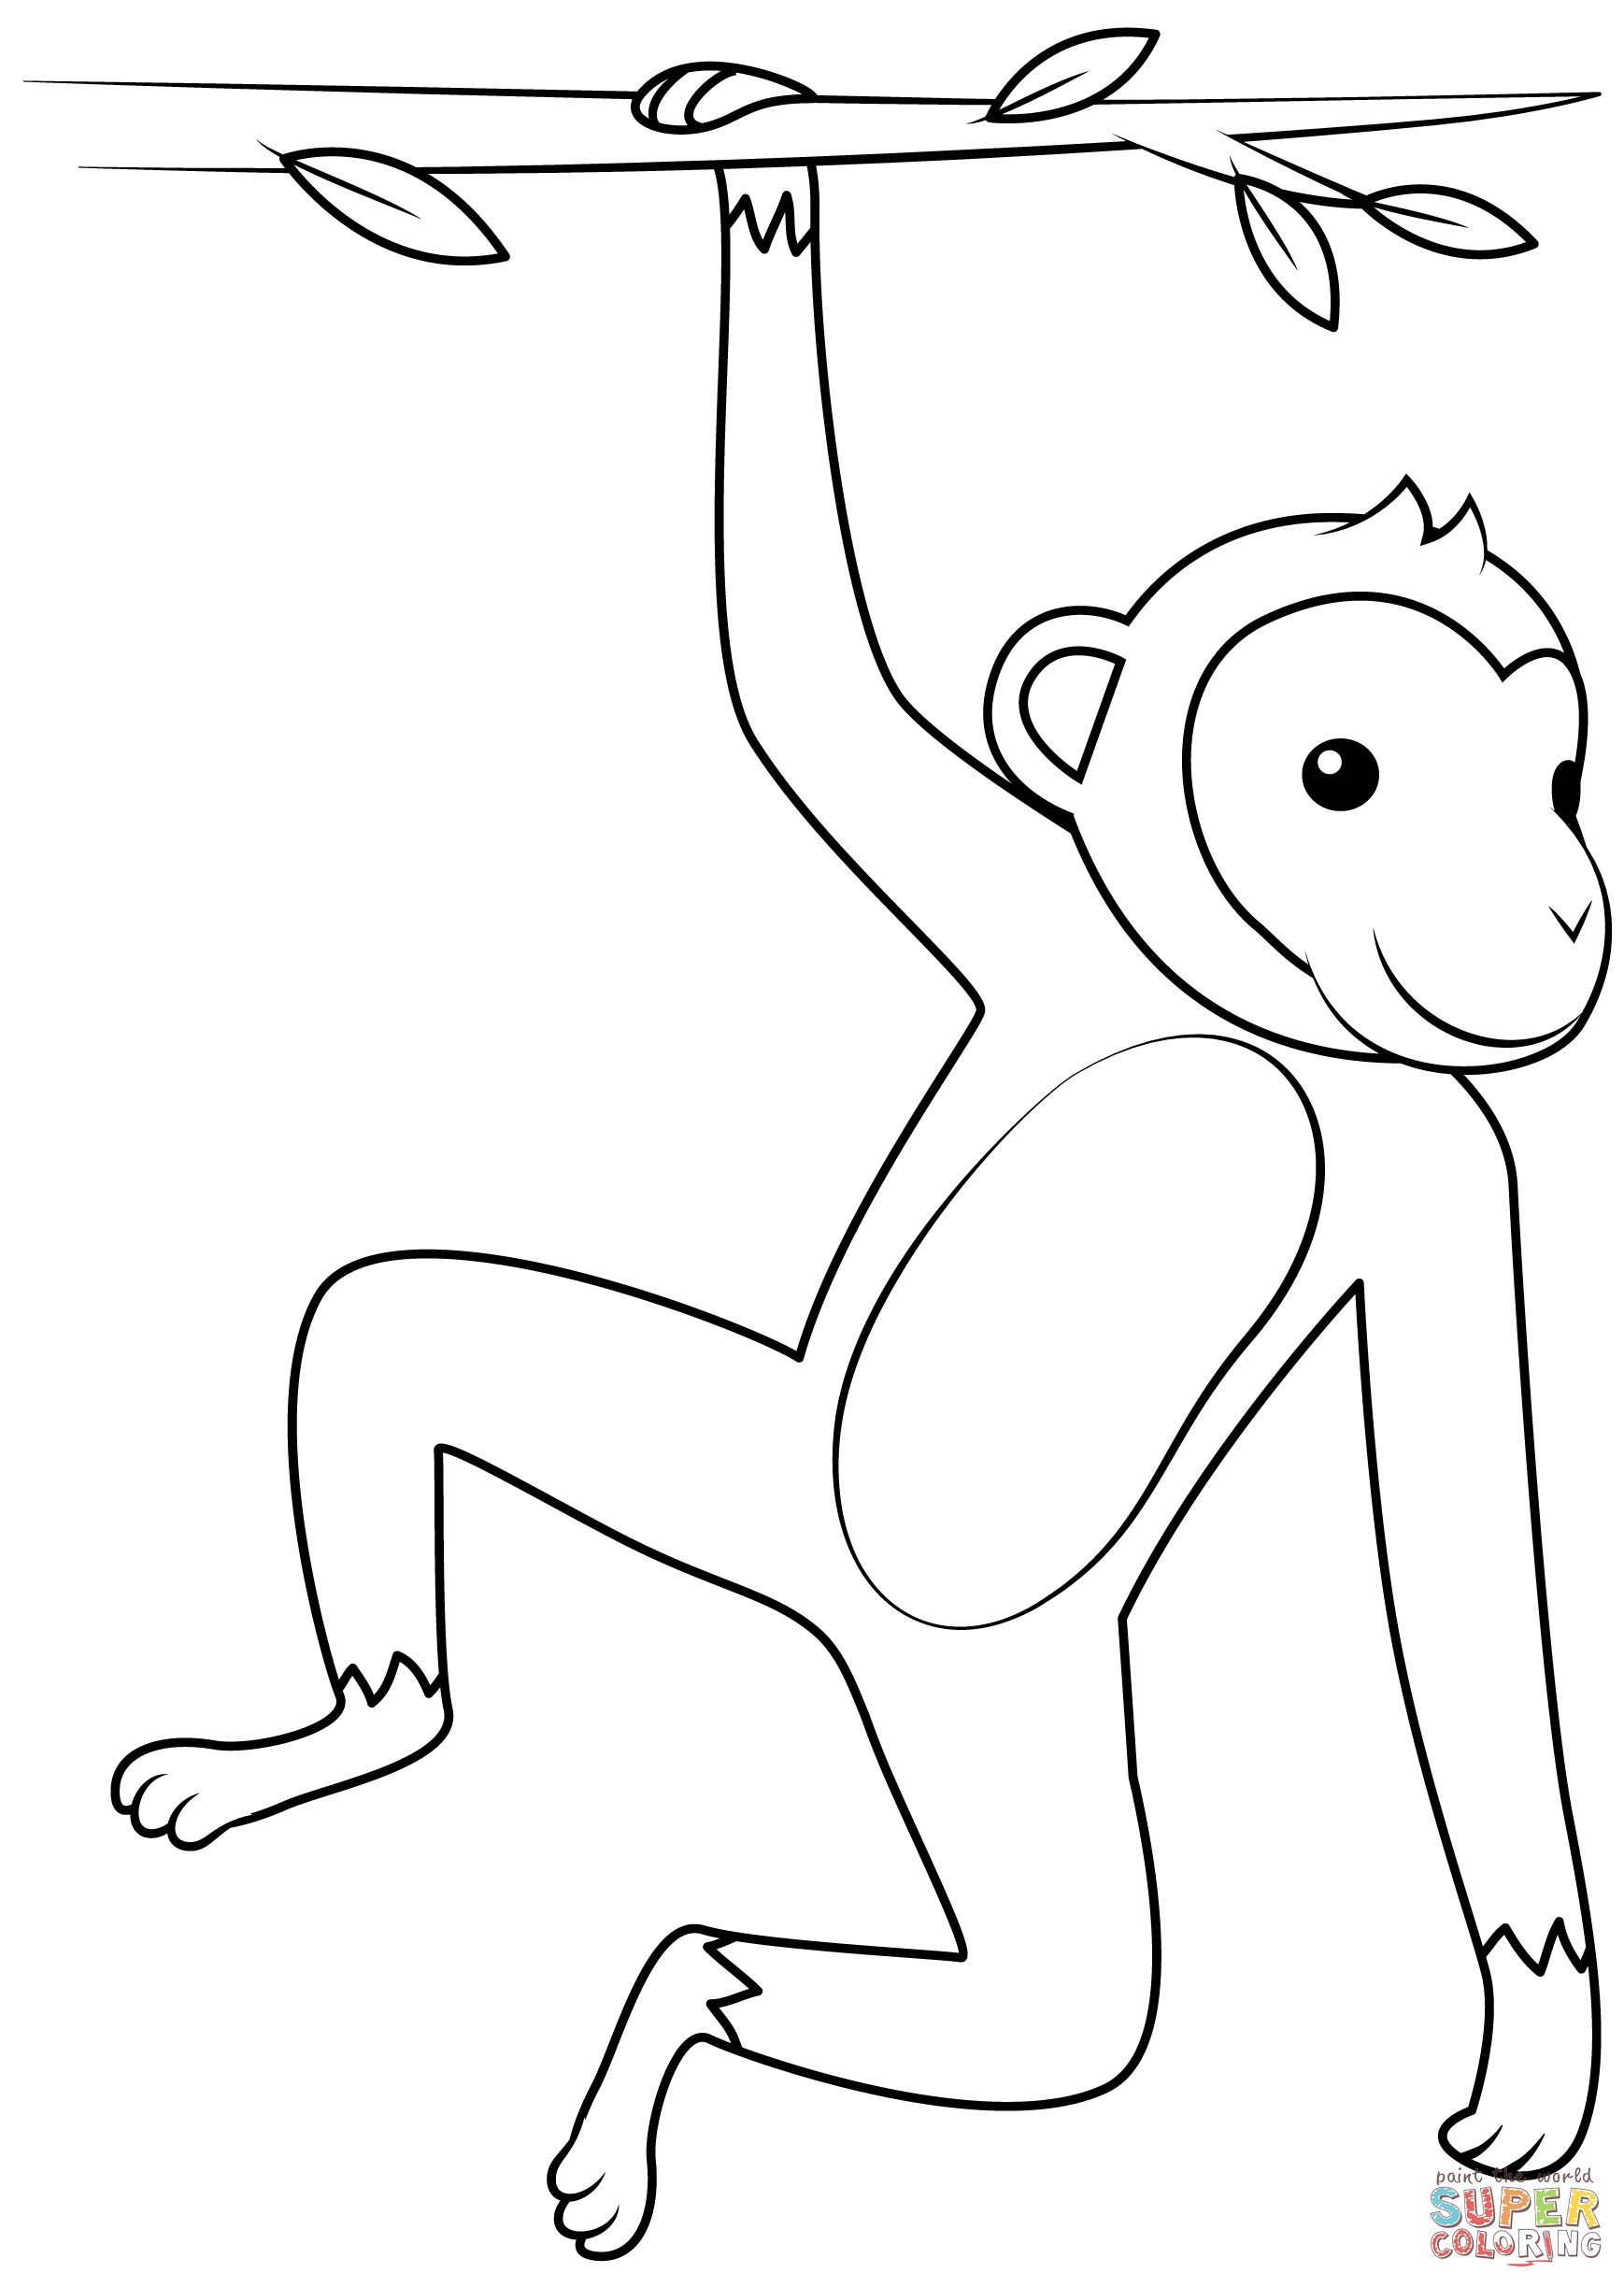 Hanging monkey coloring page free printable coloring pages